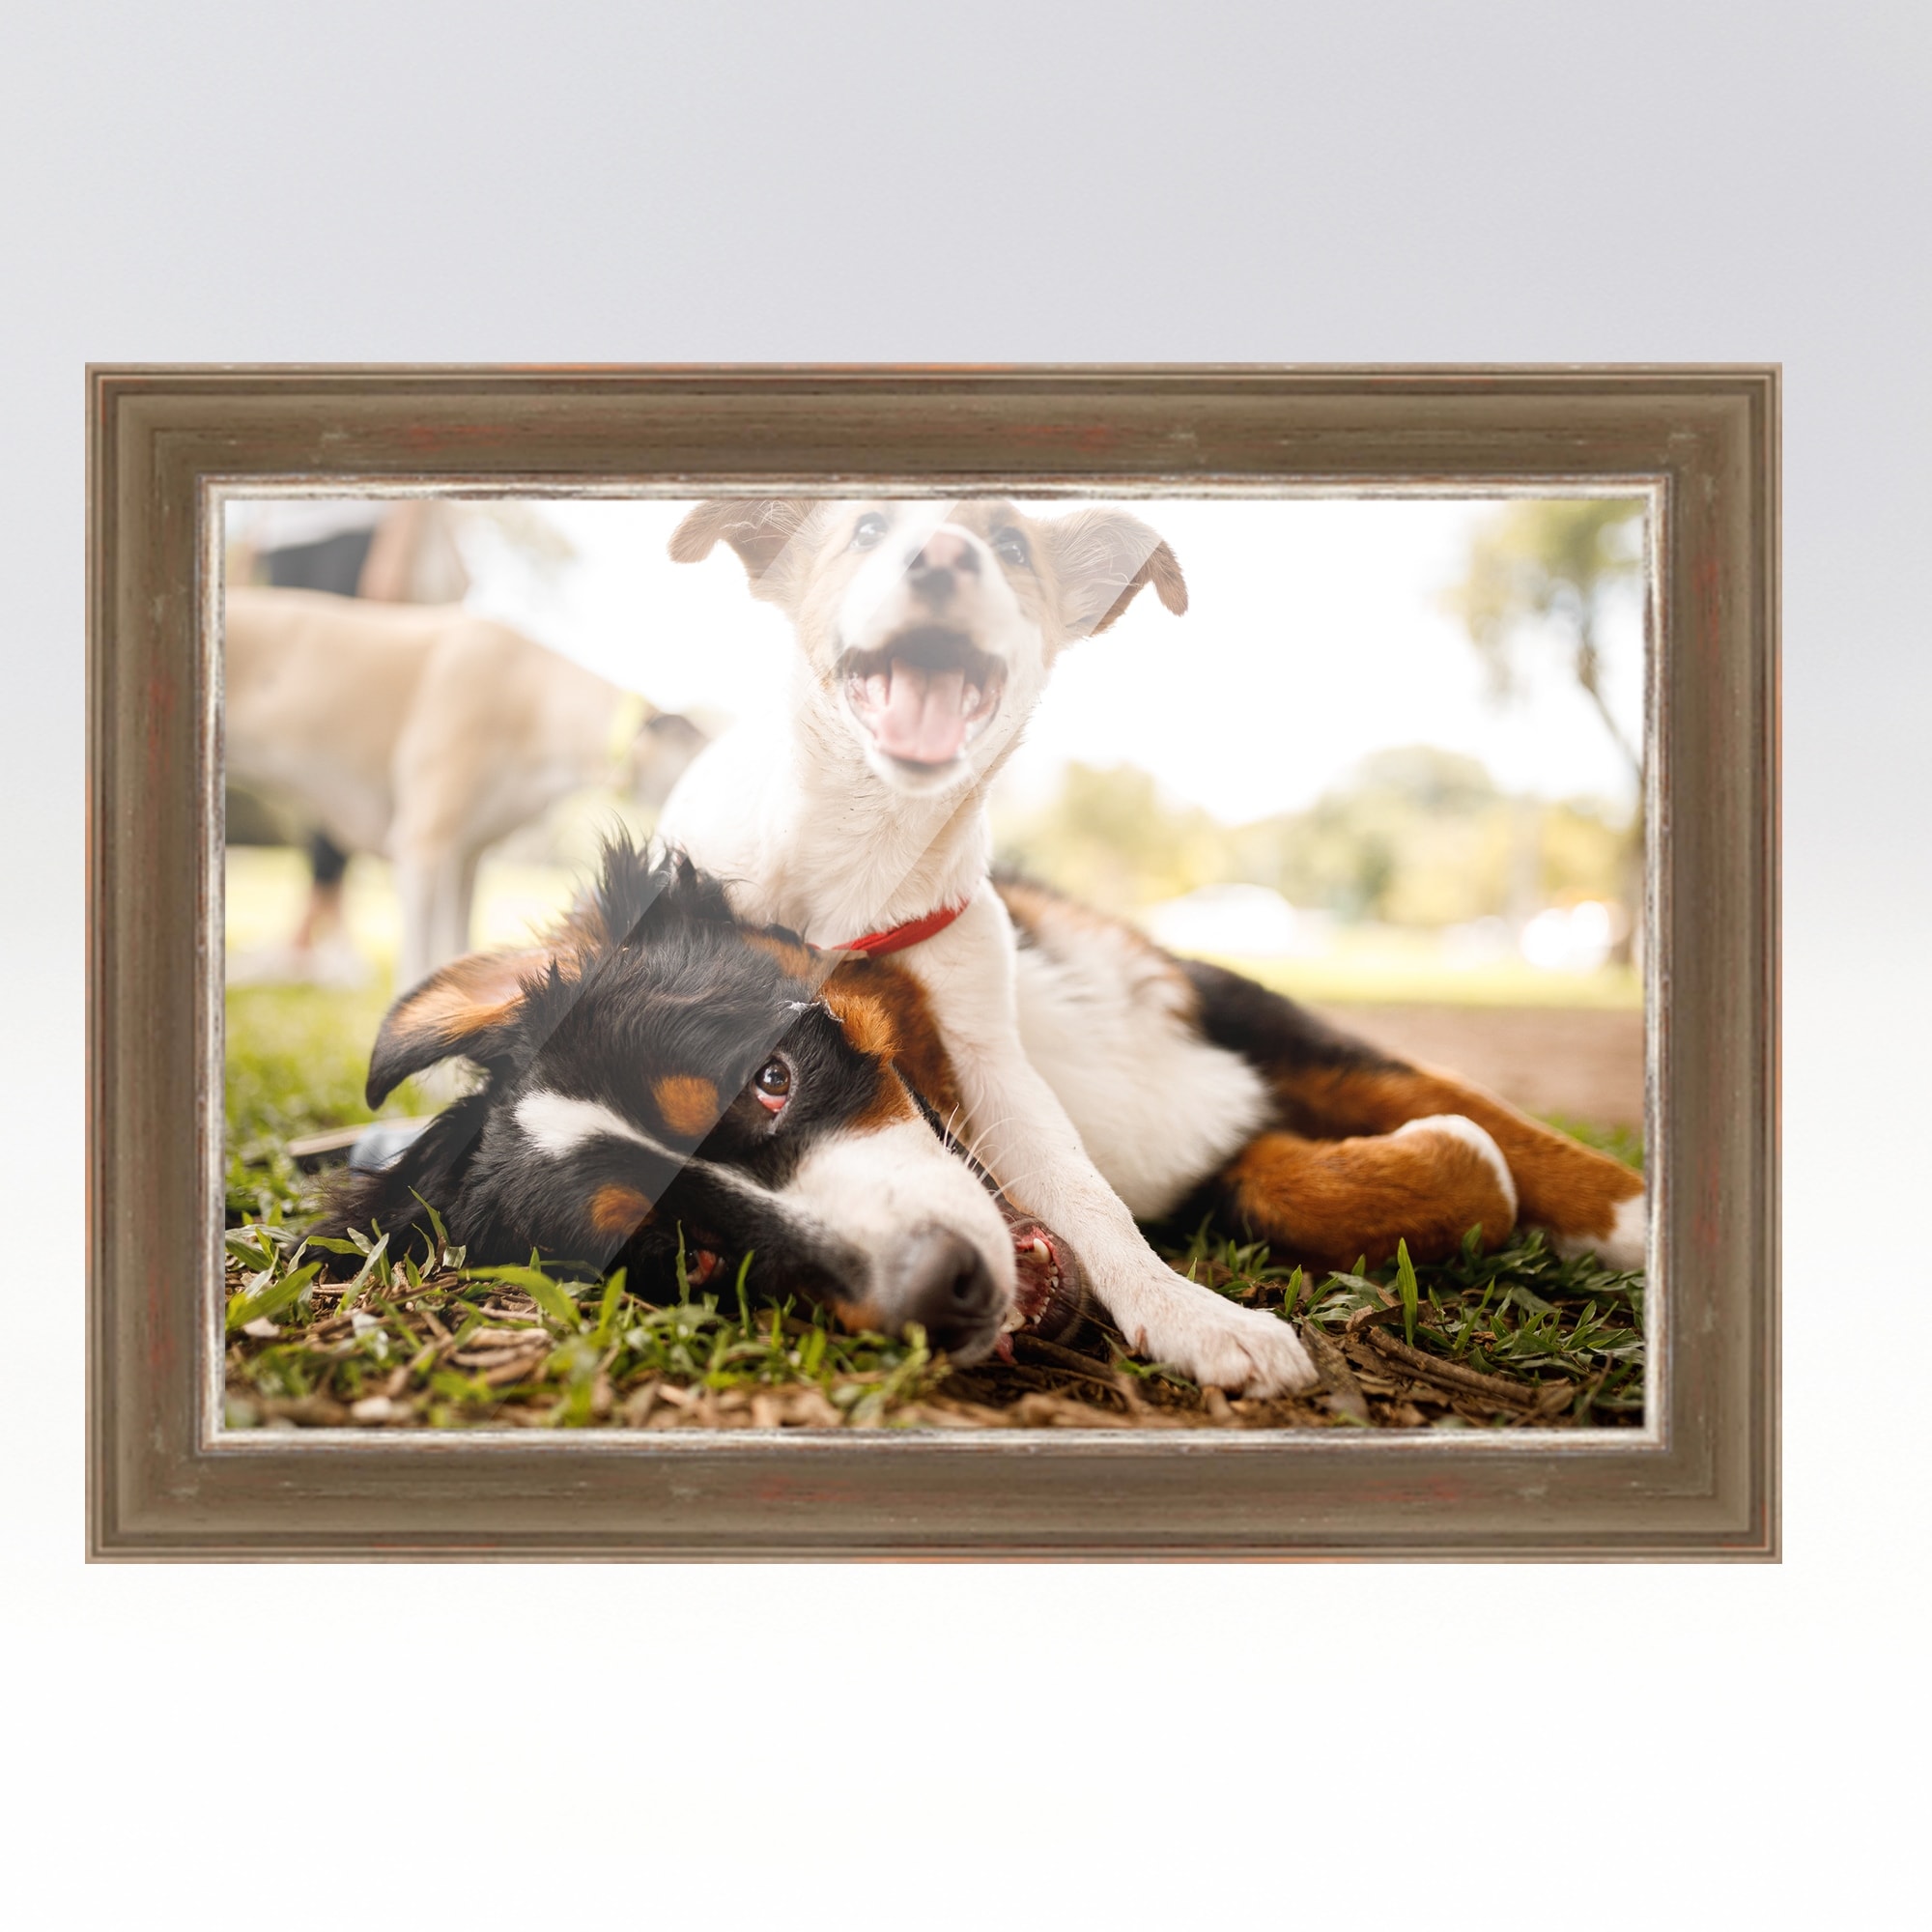 30x40 Frame Stainless Steel Silver Picture Frame - Modern 30x40 Poster  Frame Includes UV Acrylic